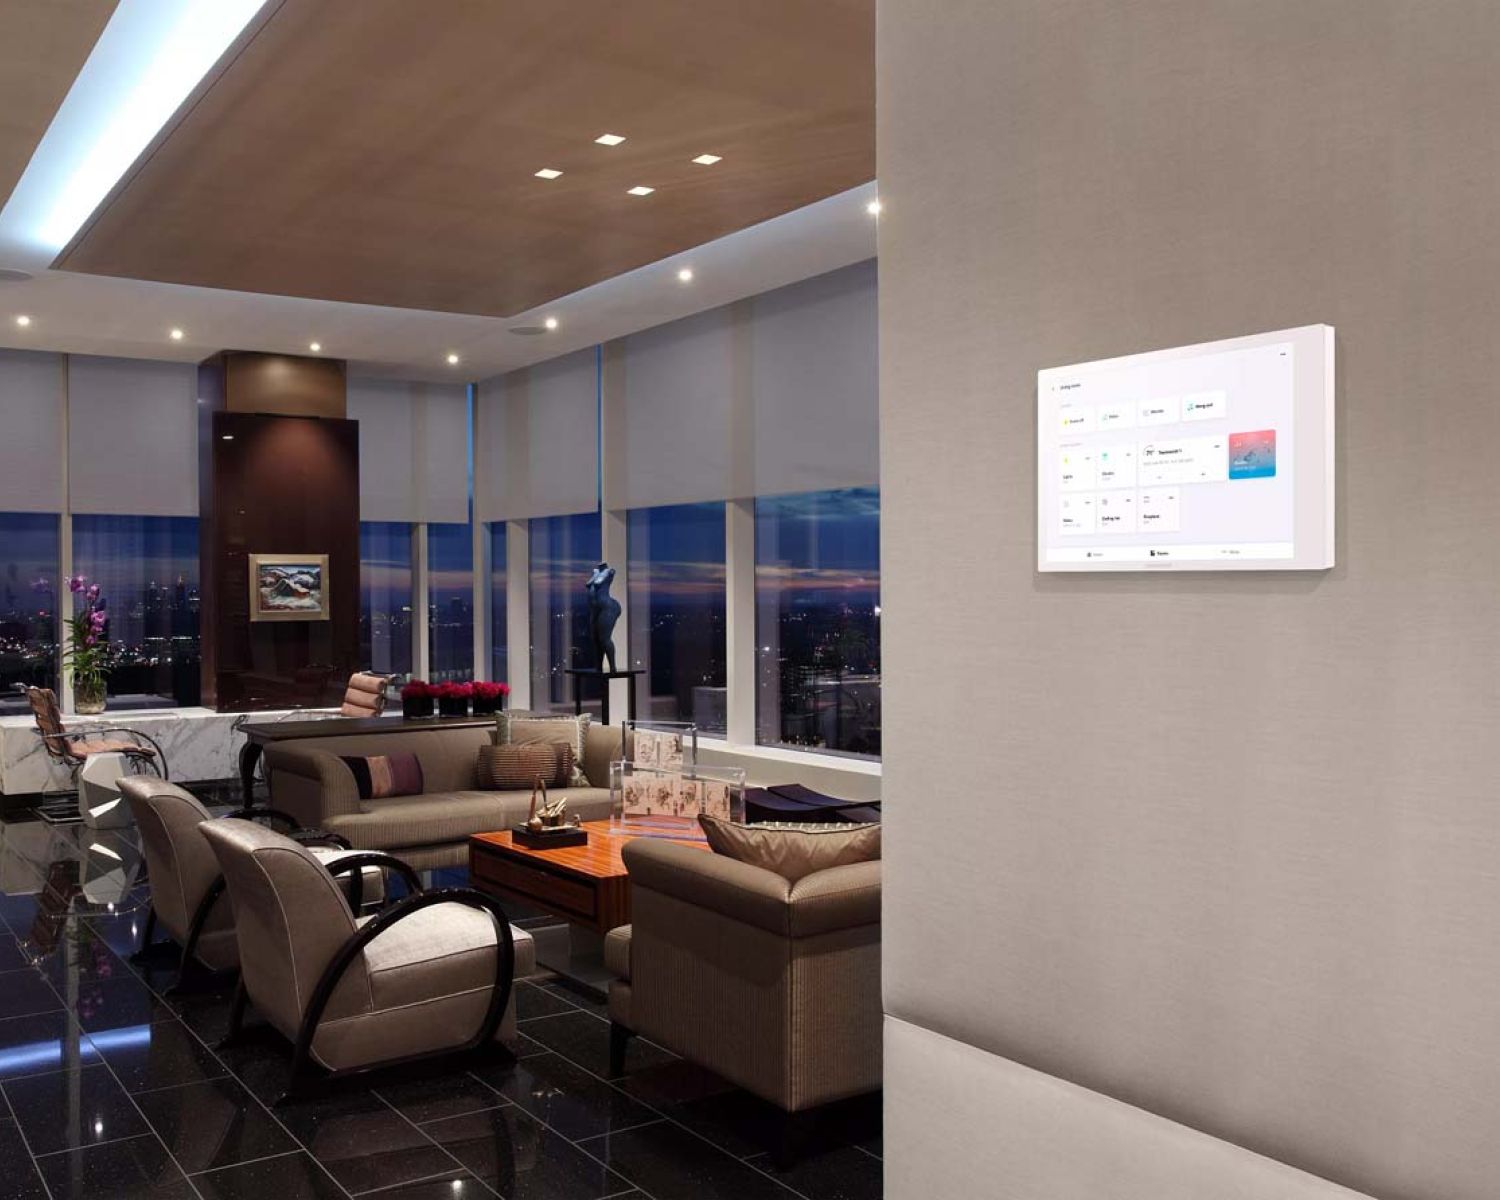 Crestron Touch panel on beige wall with Crestron Window treatments